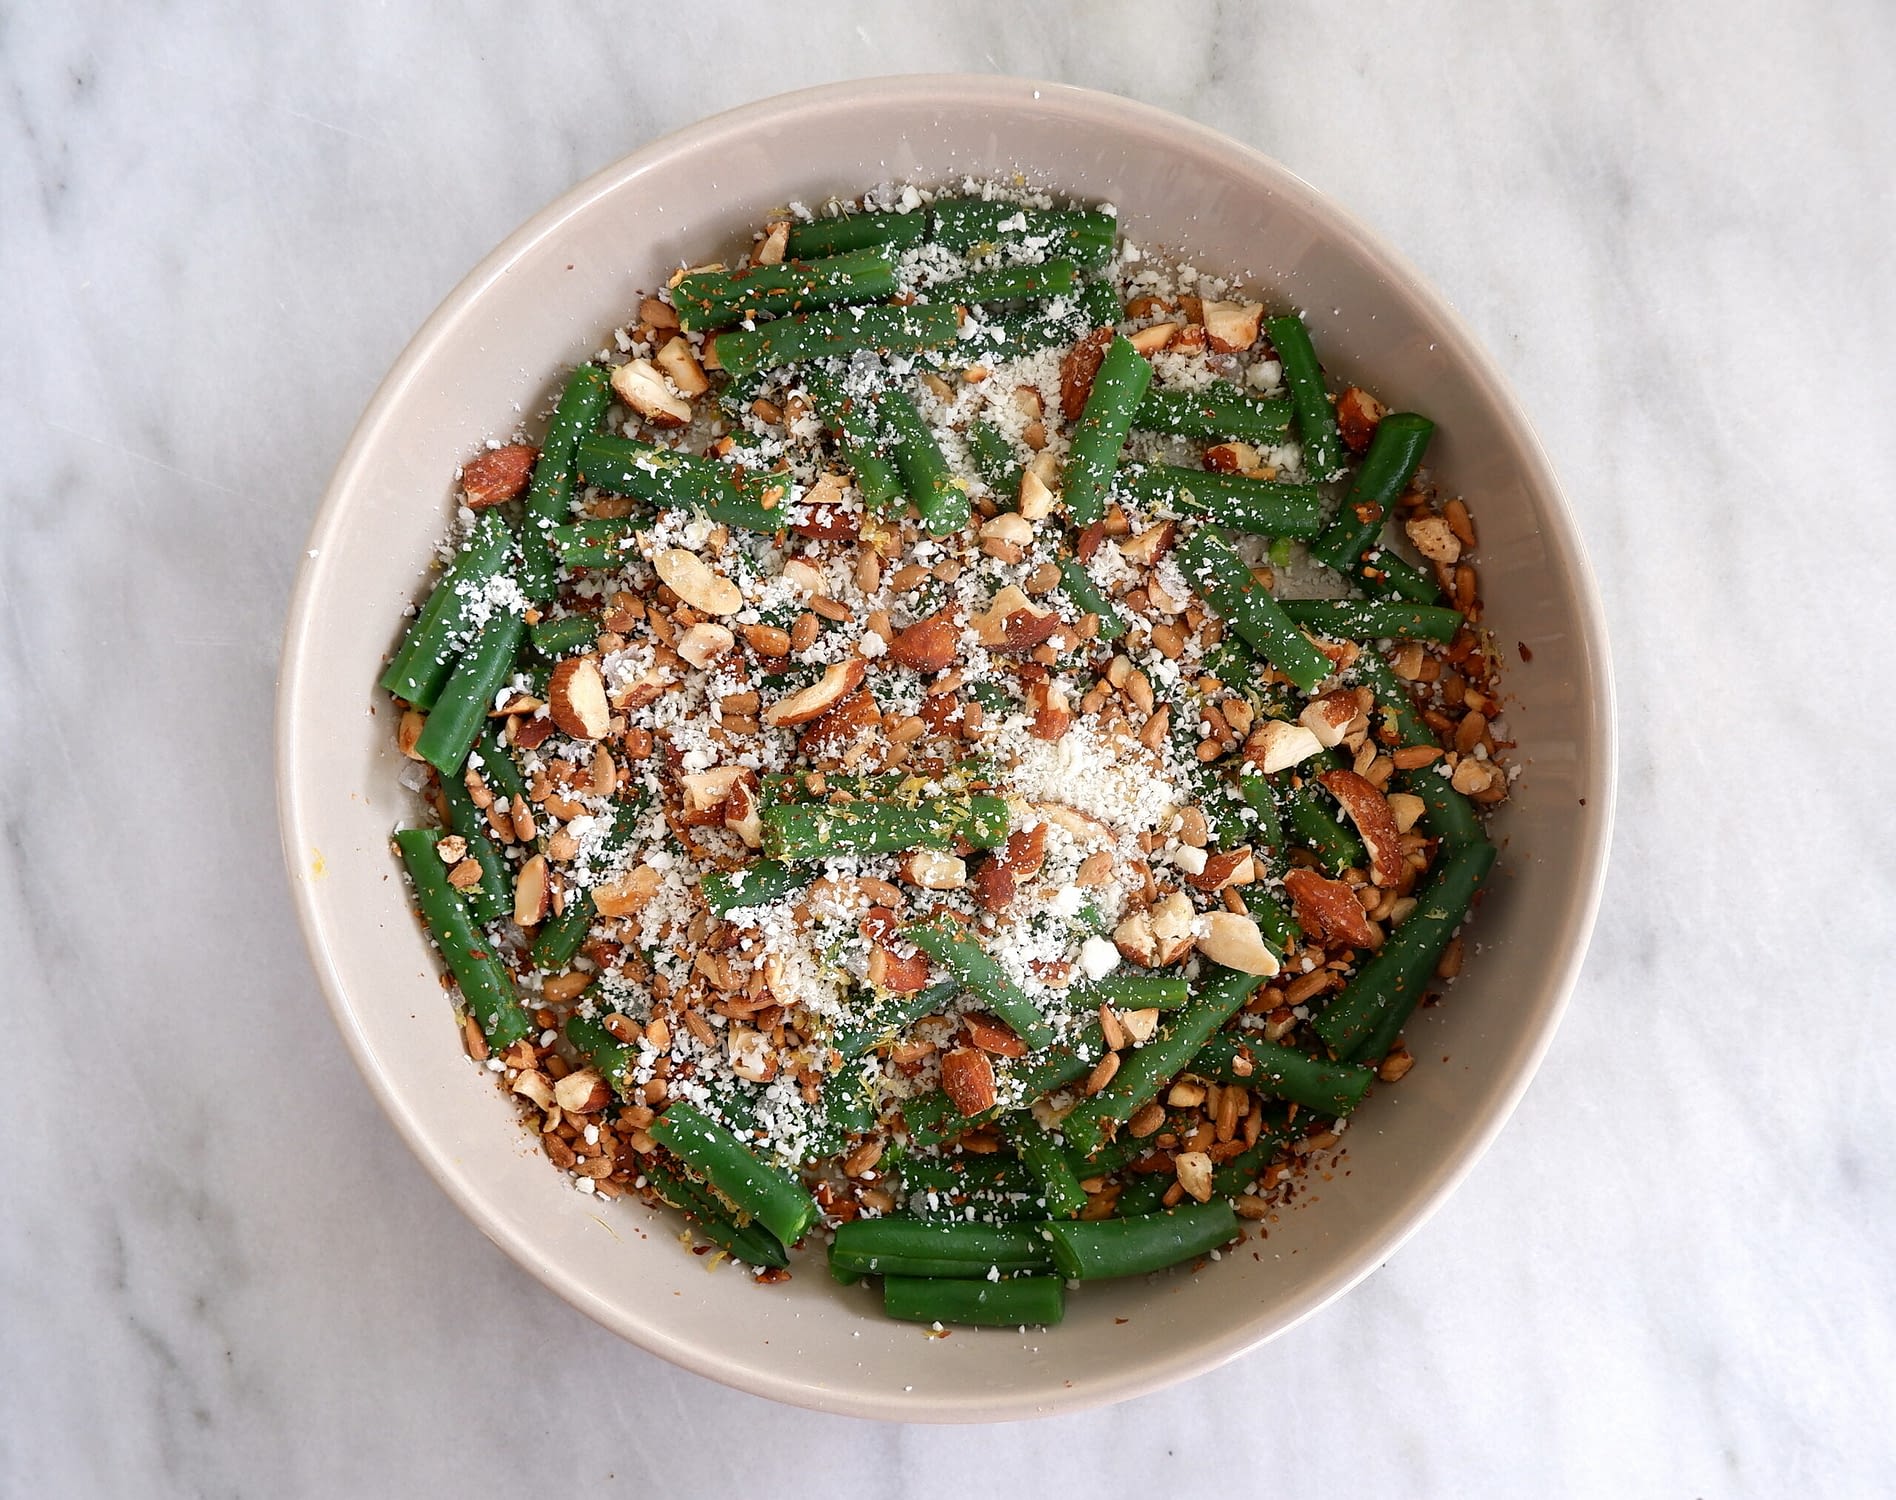 Plate of green beans with almonds, lemon zest, and cotija cheese.